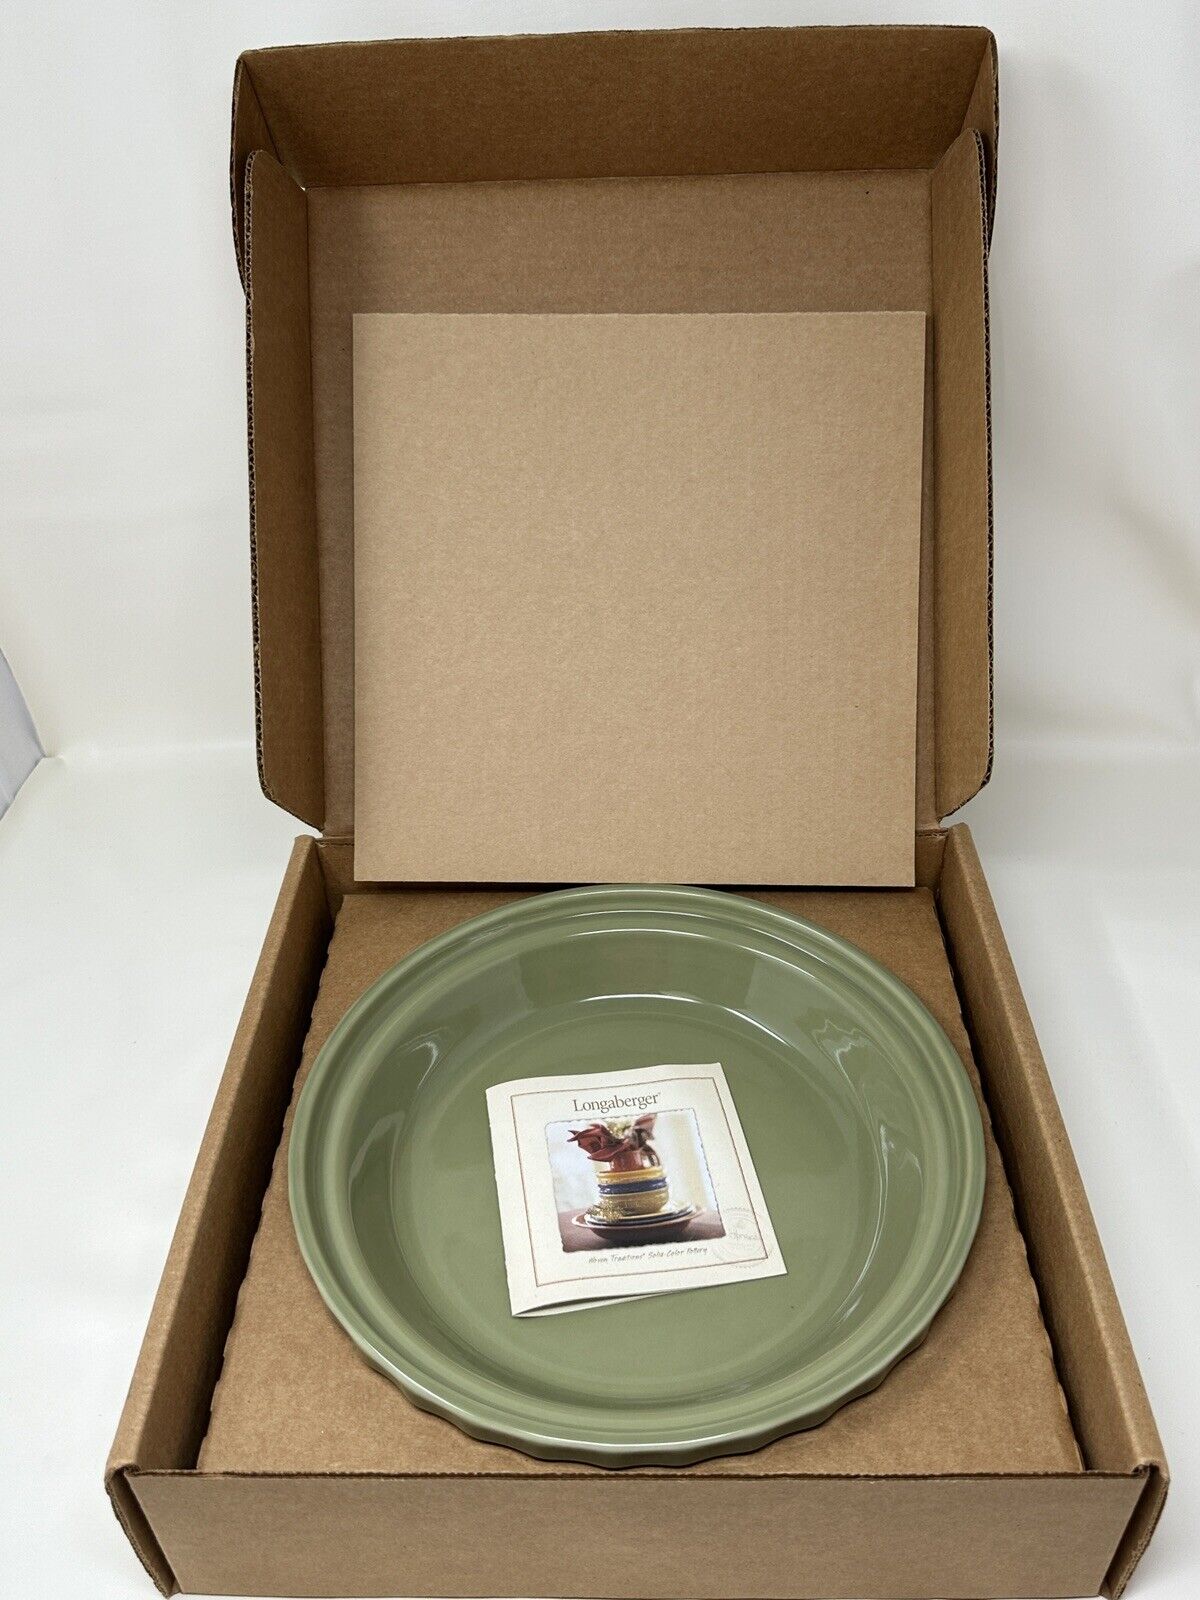 Longaberger Pottery Sage Woven Traditions 10 Inch Pie Plate ~ New In Box